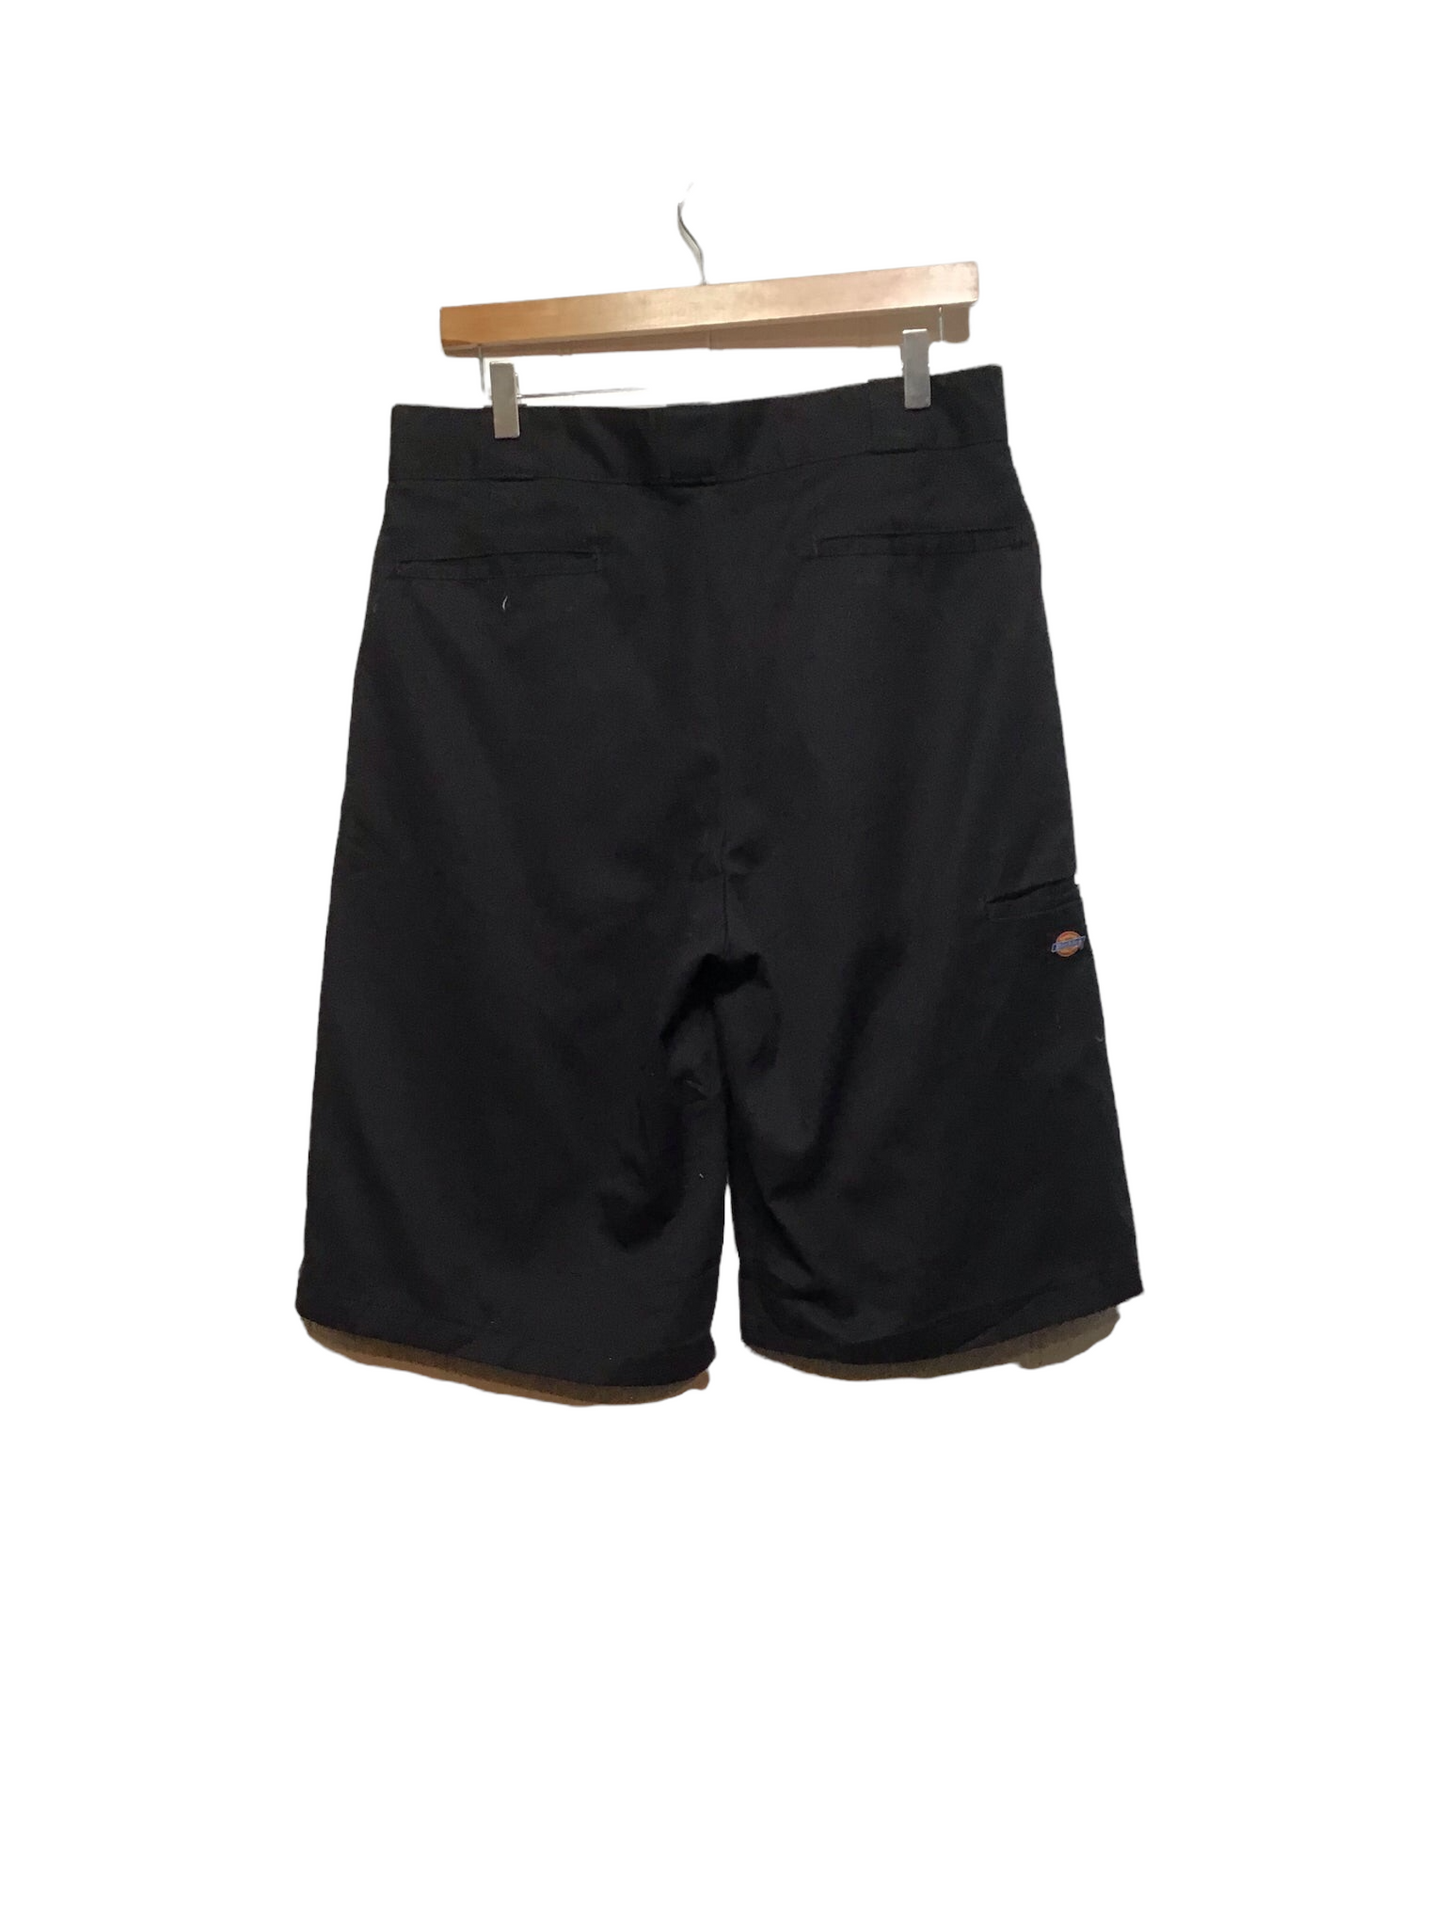 Dickies Shorts (Size M)